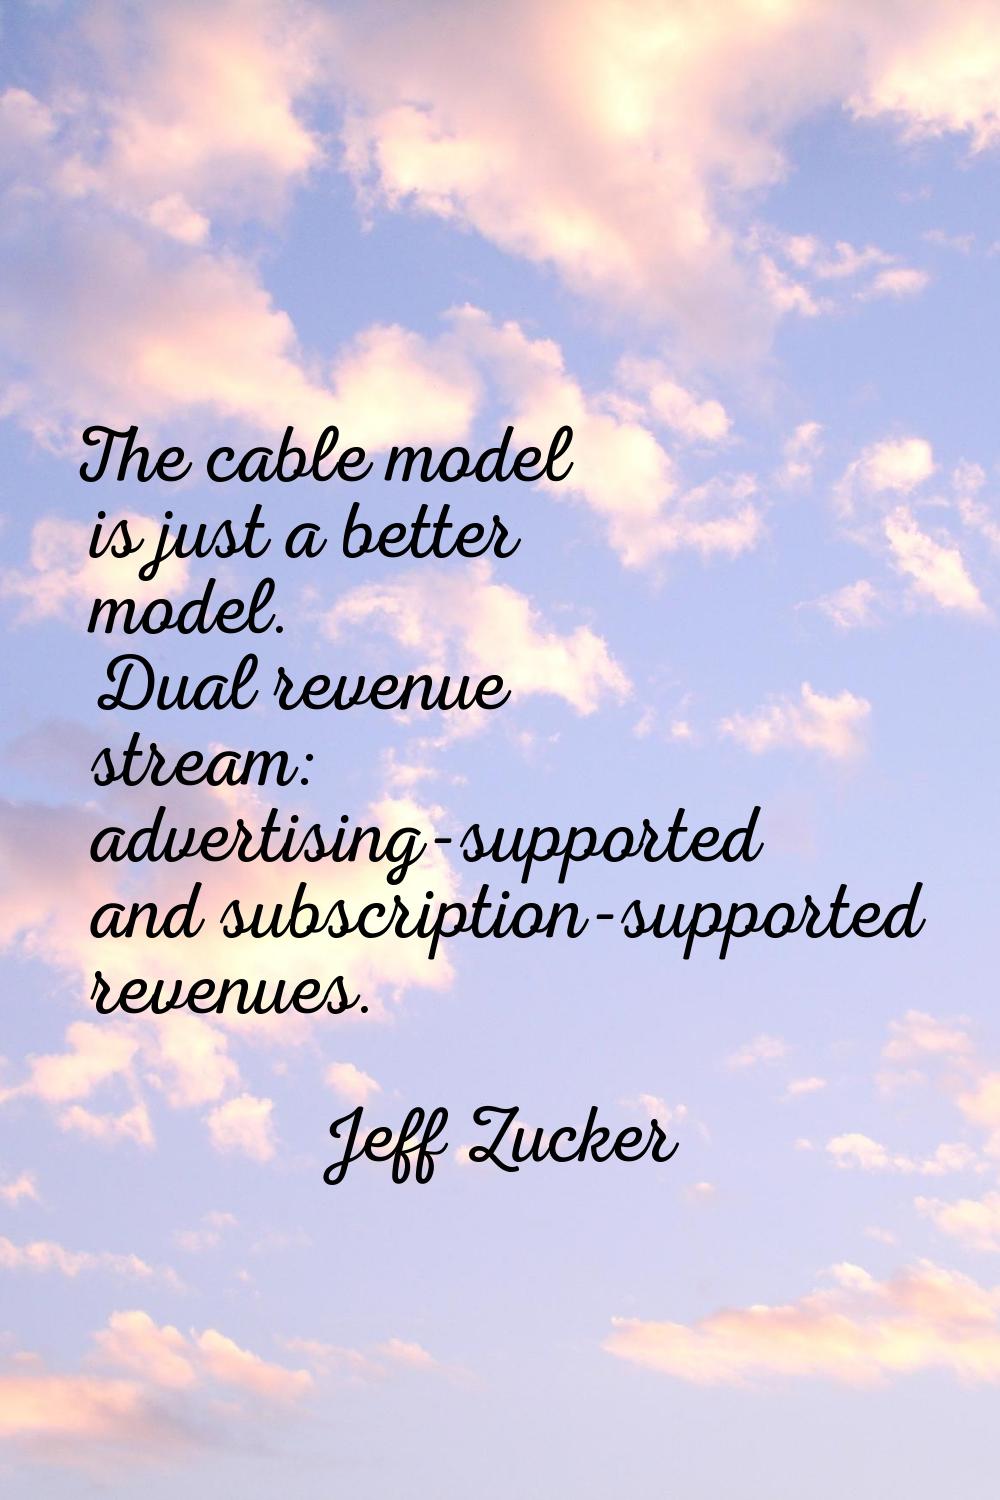 The cable model is just a better model. Dual revenue stream: advertising-supported and subscription